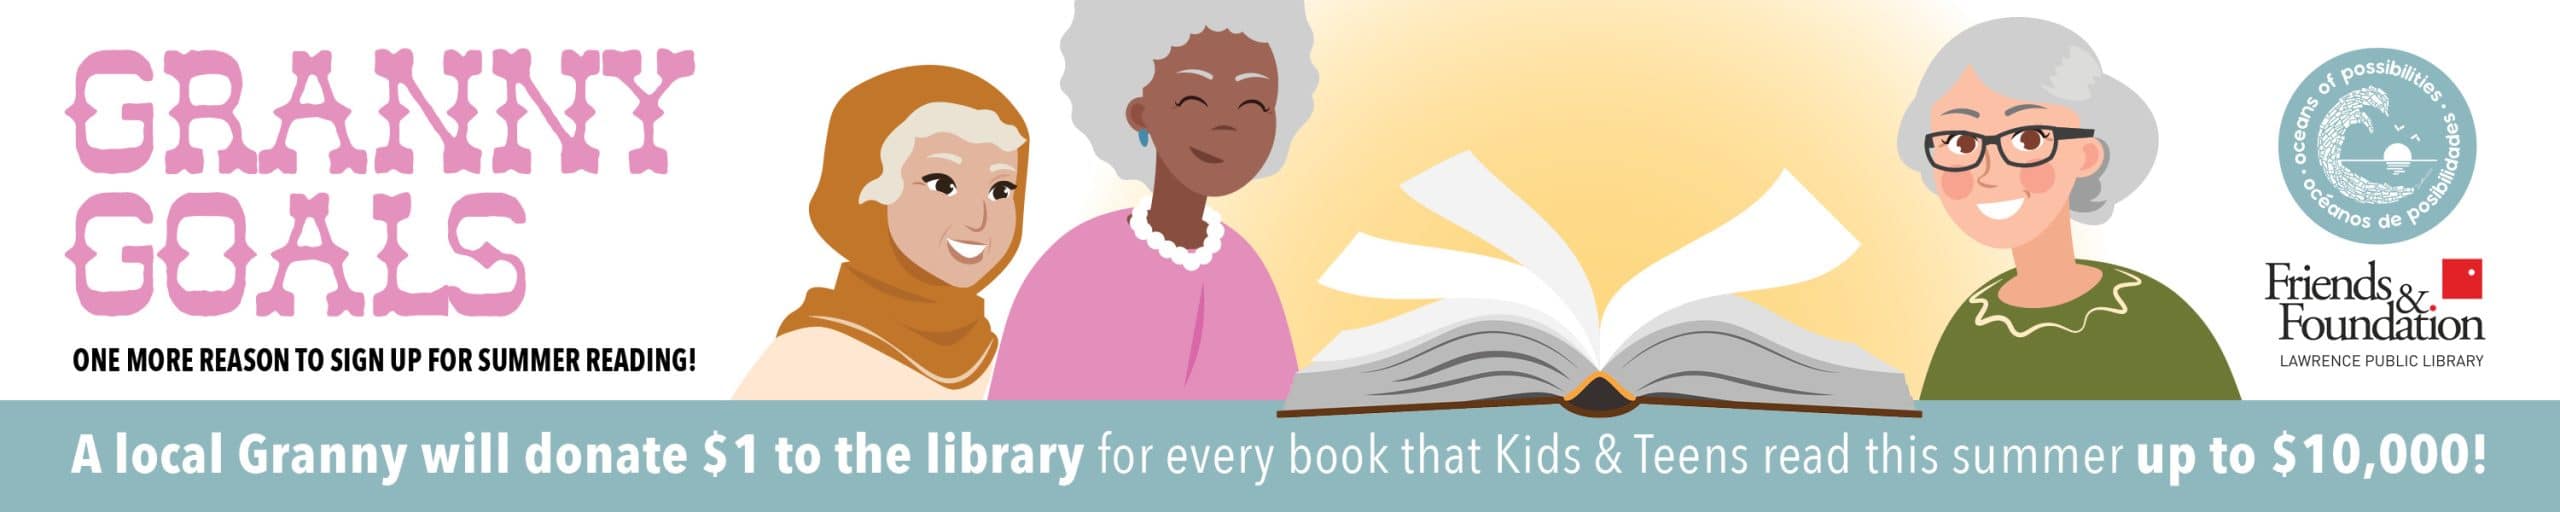 Another reason to sign up for the library's Summer Reading challenge! A local granny will donate $1 to the library for every book that kids and teens read this summer — up to $10,000!